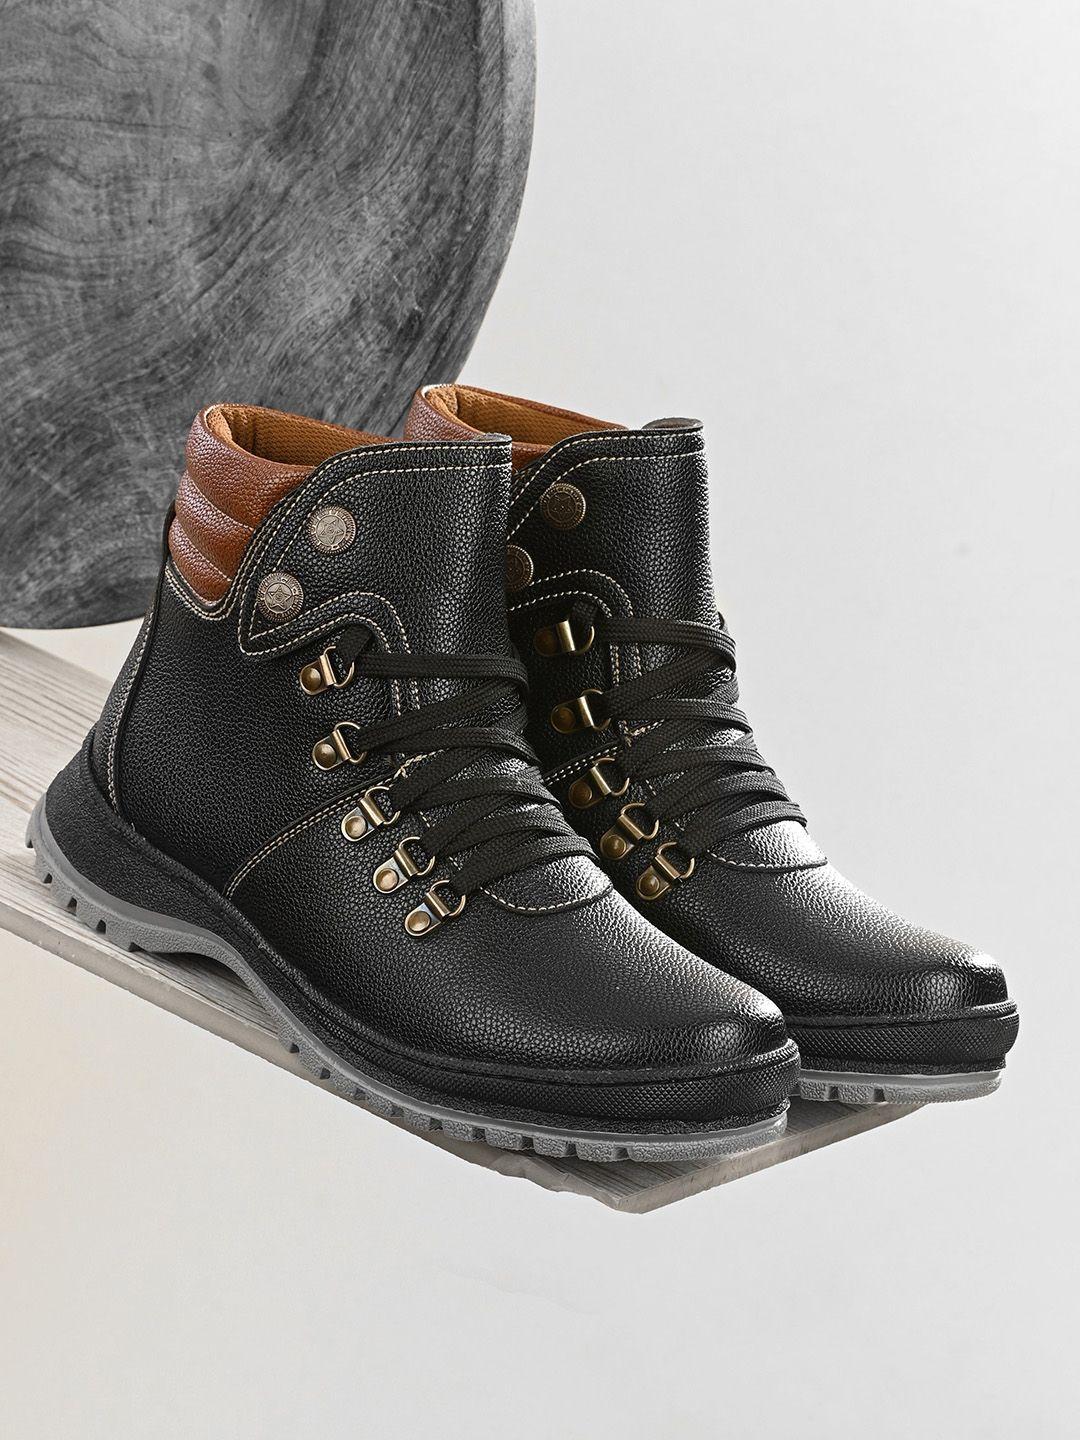 the roadster lifestyle co. men black and brown textured biker boots